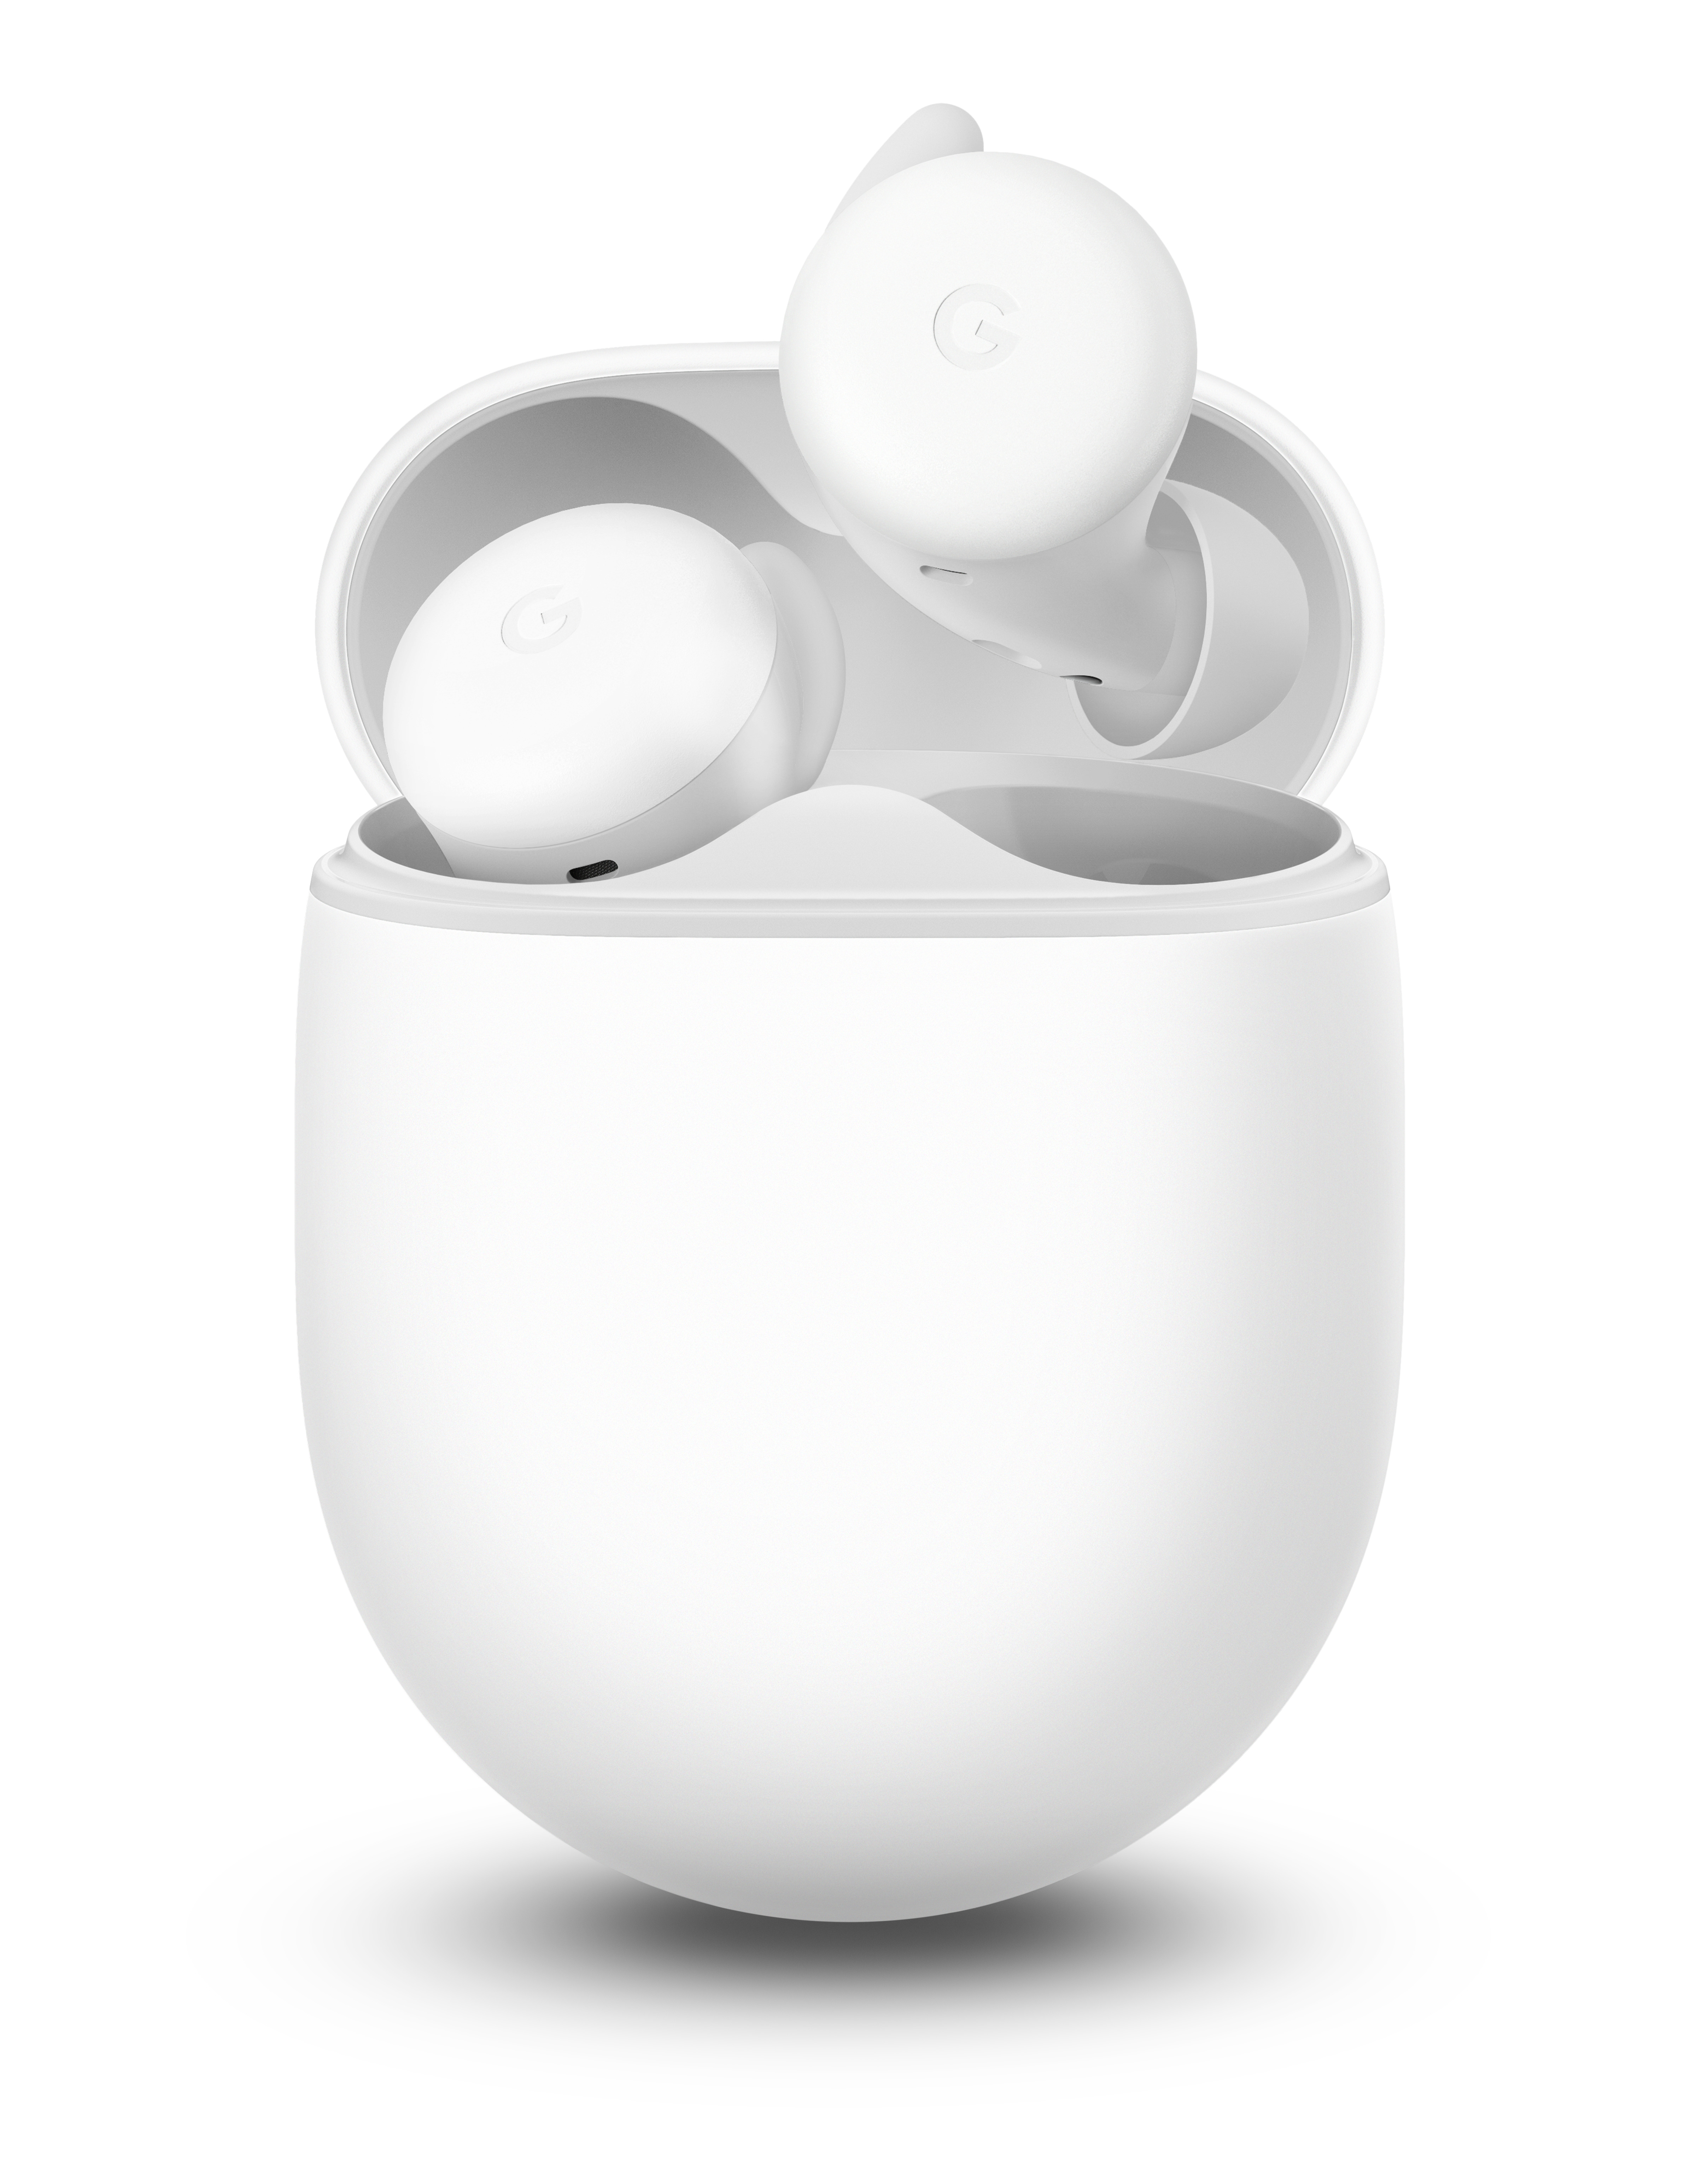 Google Pixel Buds A-Series - Truly Wireless Earbuds - Audio Headphones with Bluetooth - White - image 1 of 8